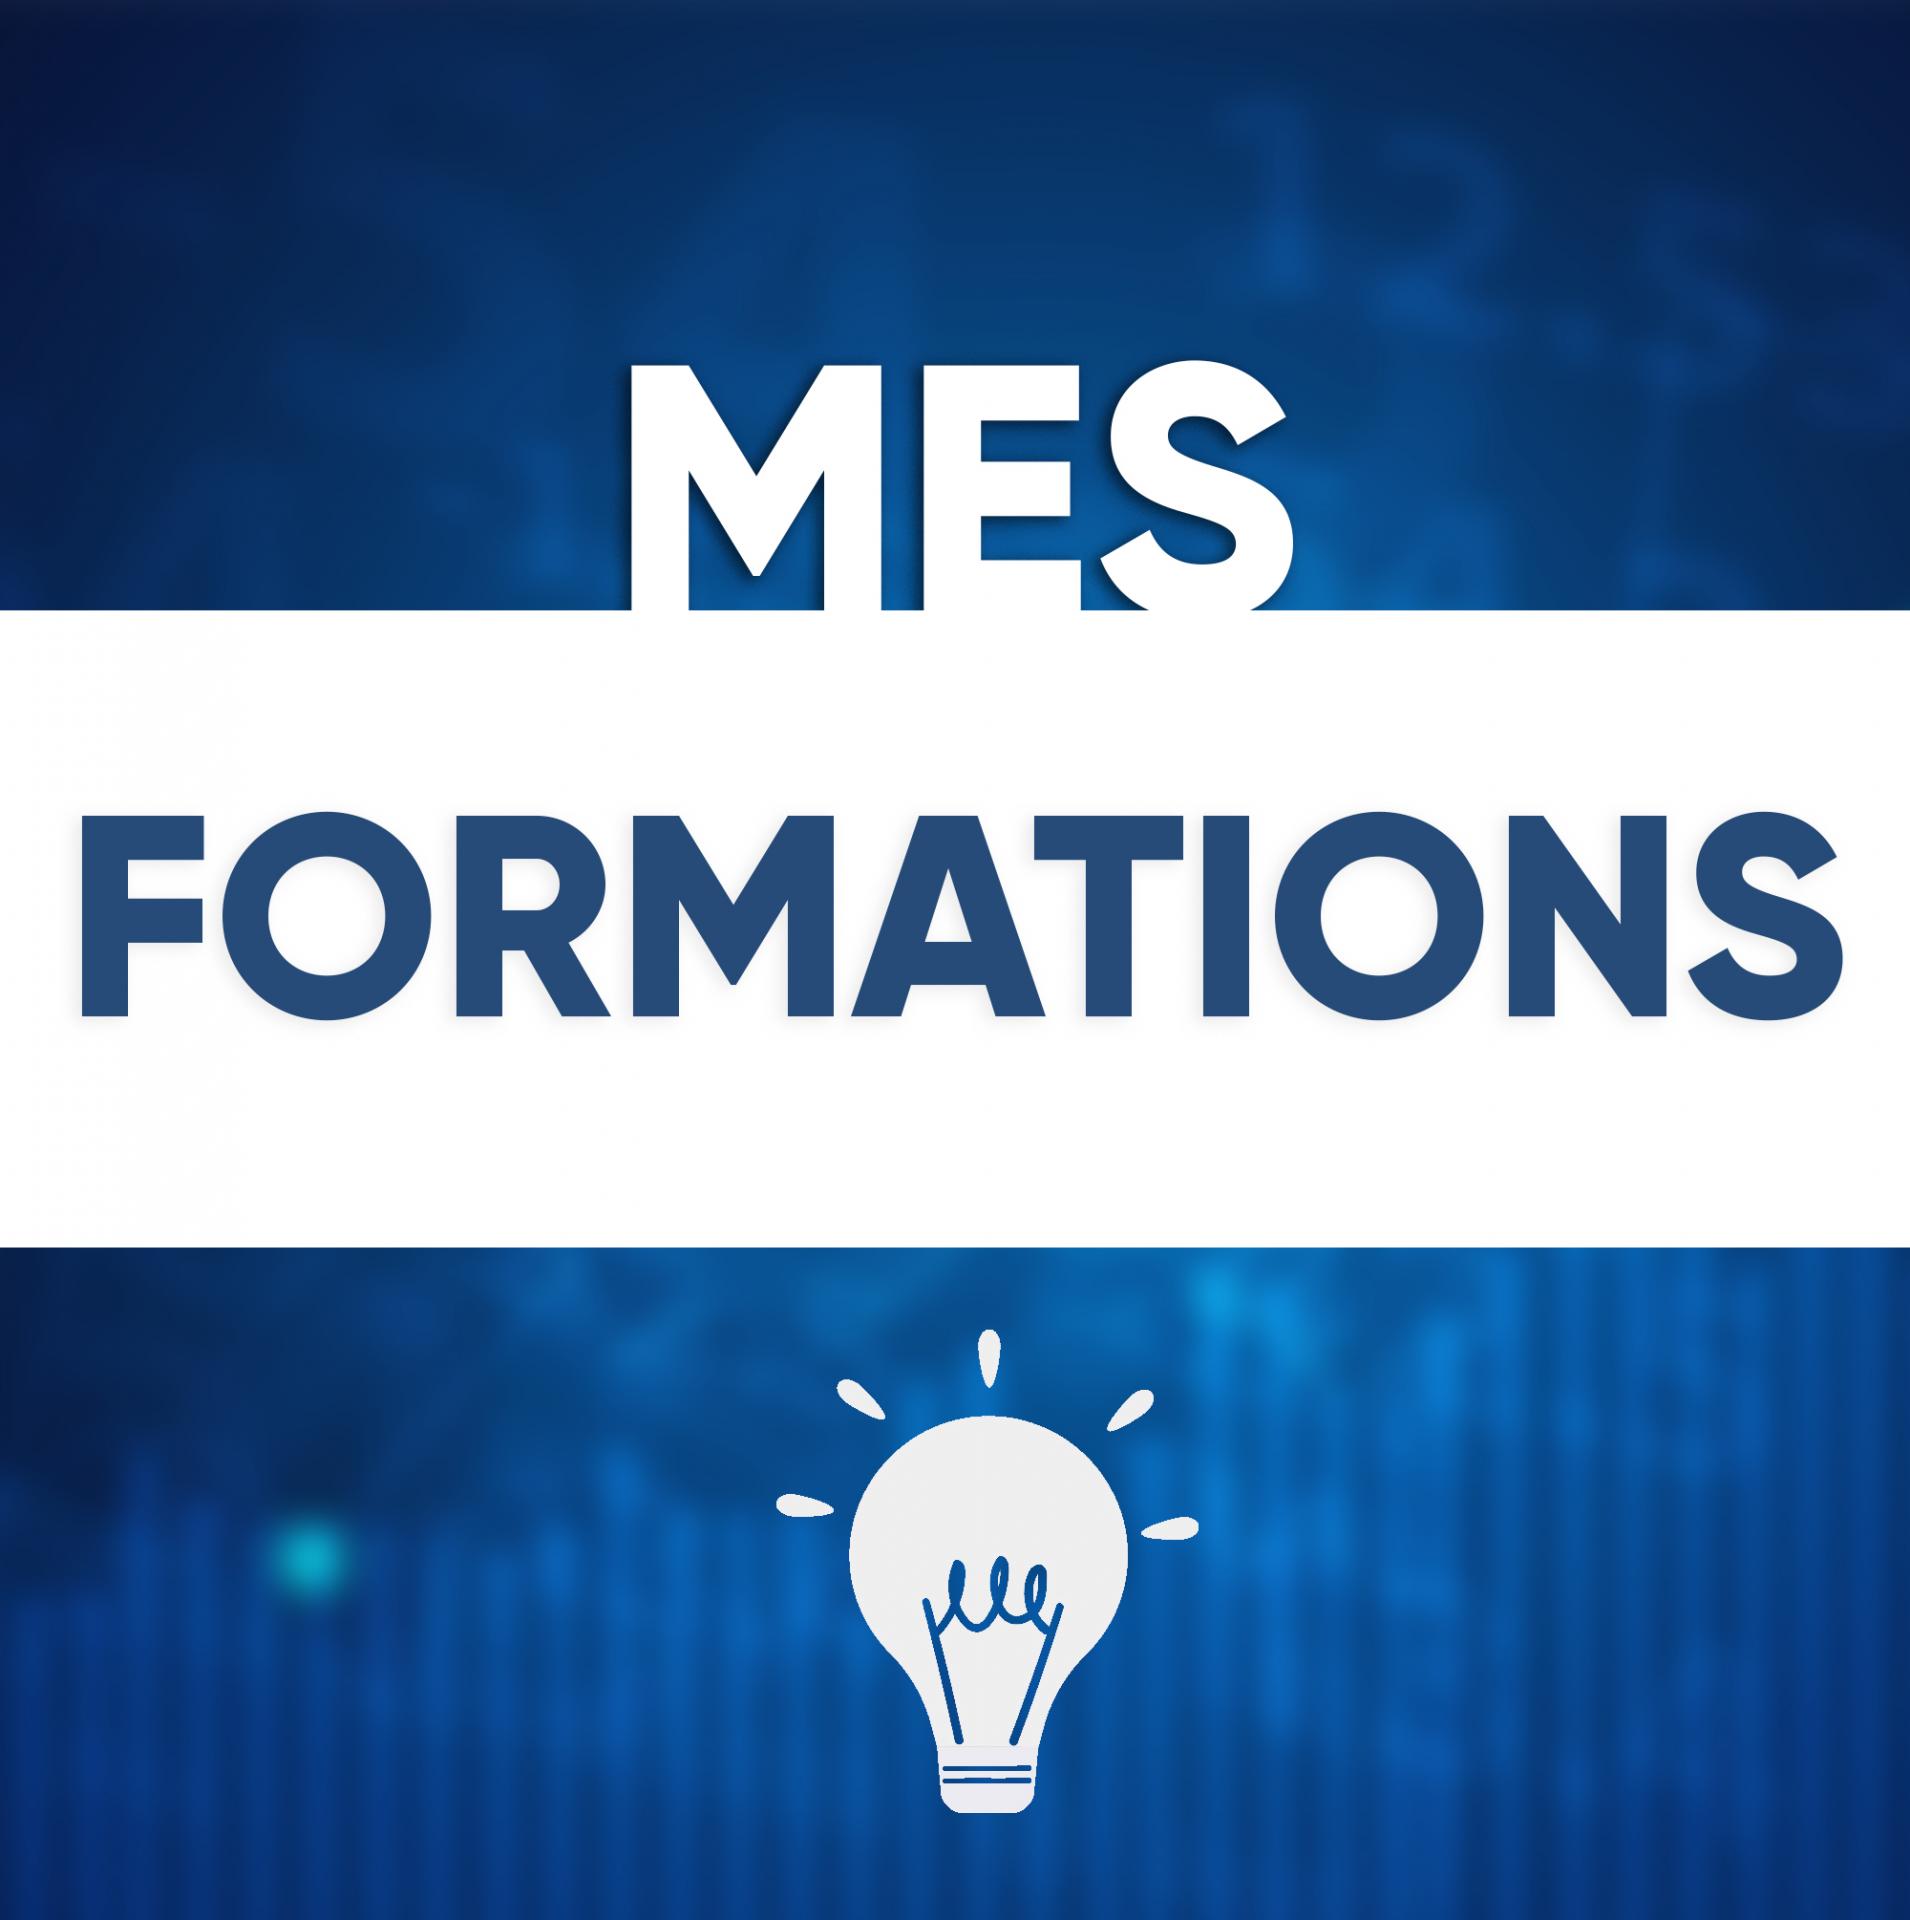 Mes formations hd